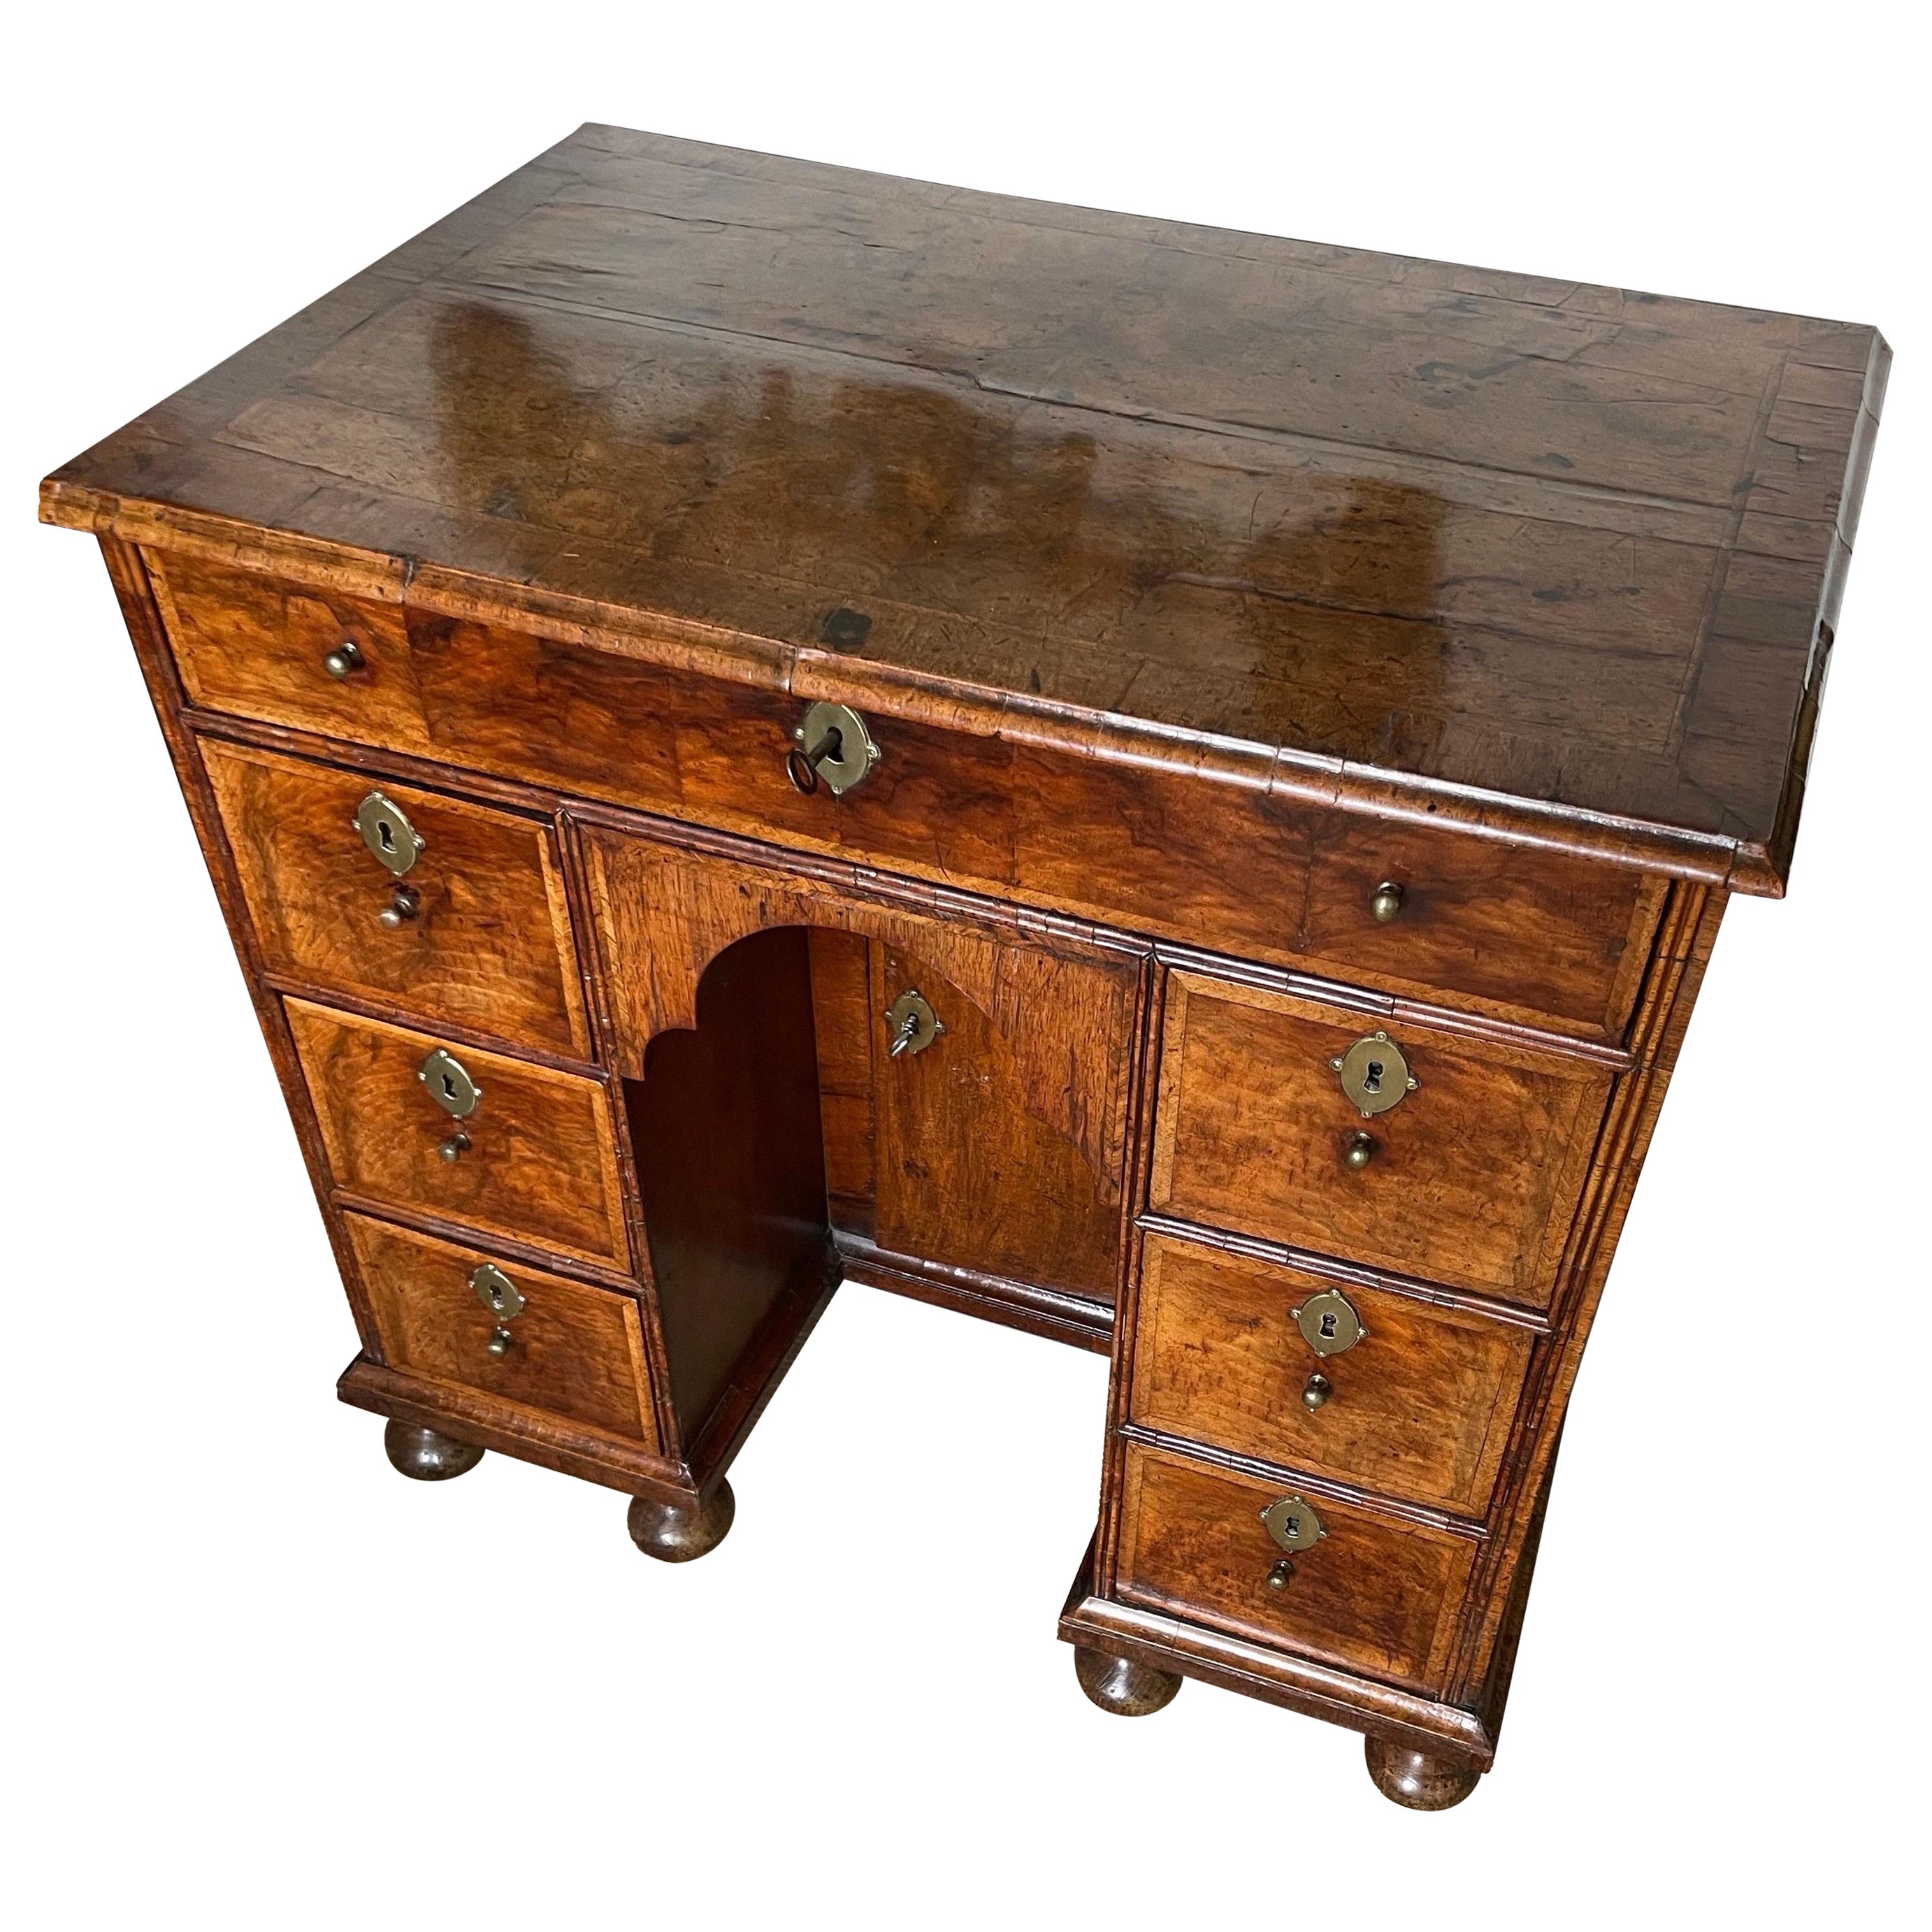 Early 18th C Queen Anne Kneehole Desk For Sale